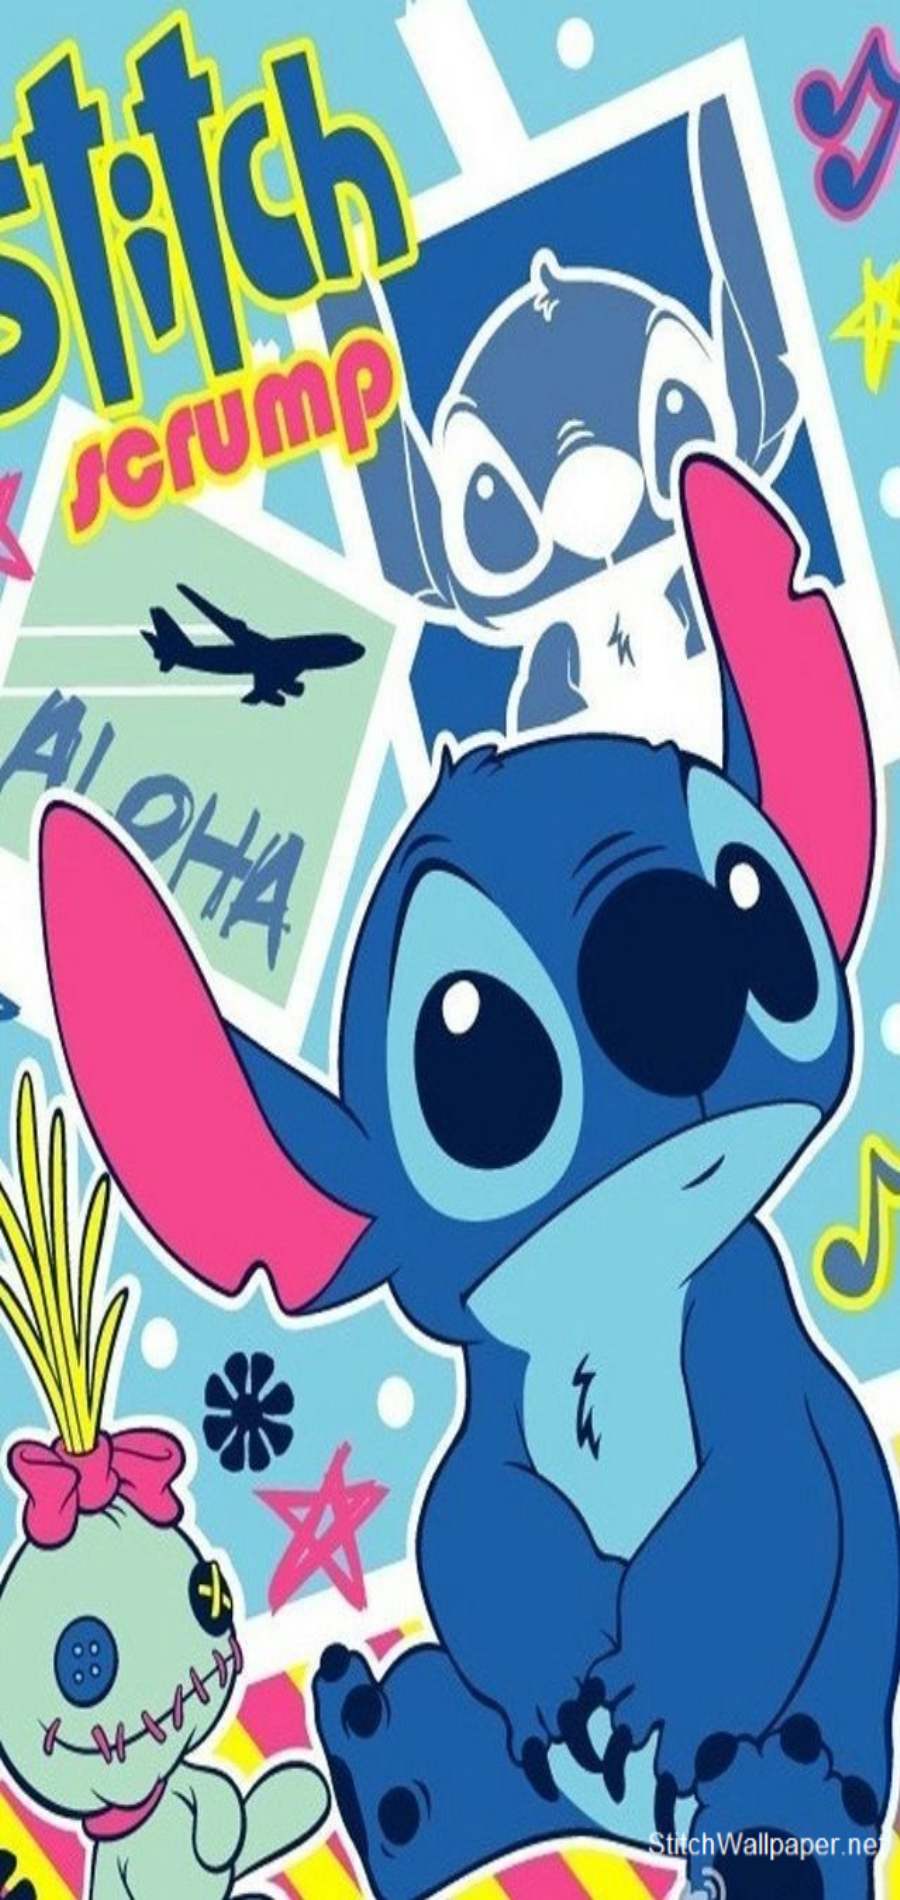 stitch wallpaper for phone